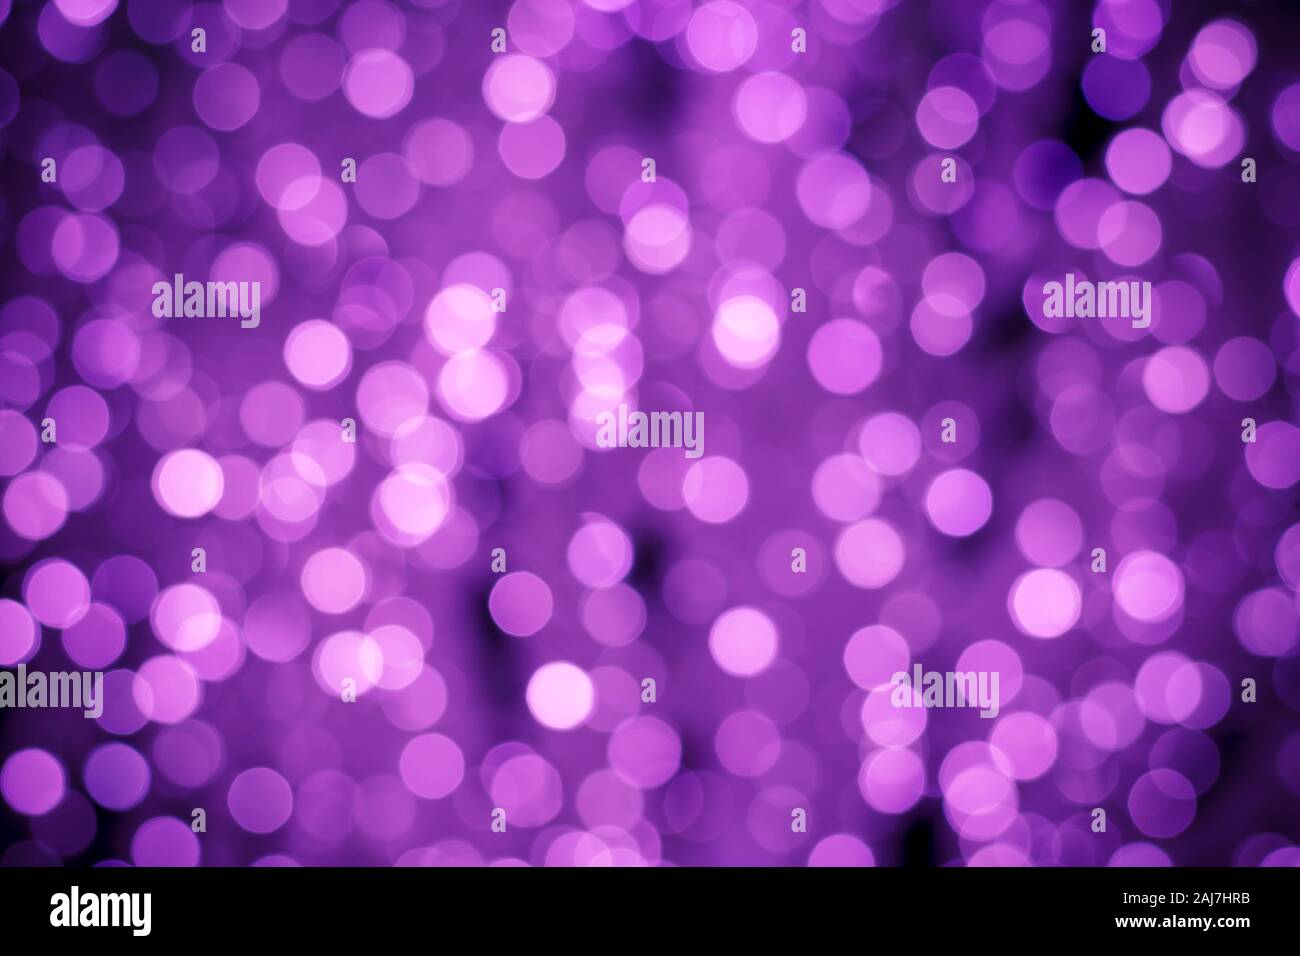 Abstract purple background with night bokeh lights. Illuminated backgrounds. Blurred backdrop, glowing texture, defocused boke. Shiny pink circles. Gl Stock Photo